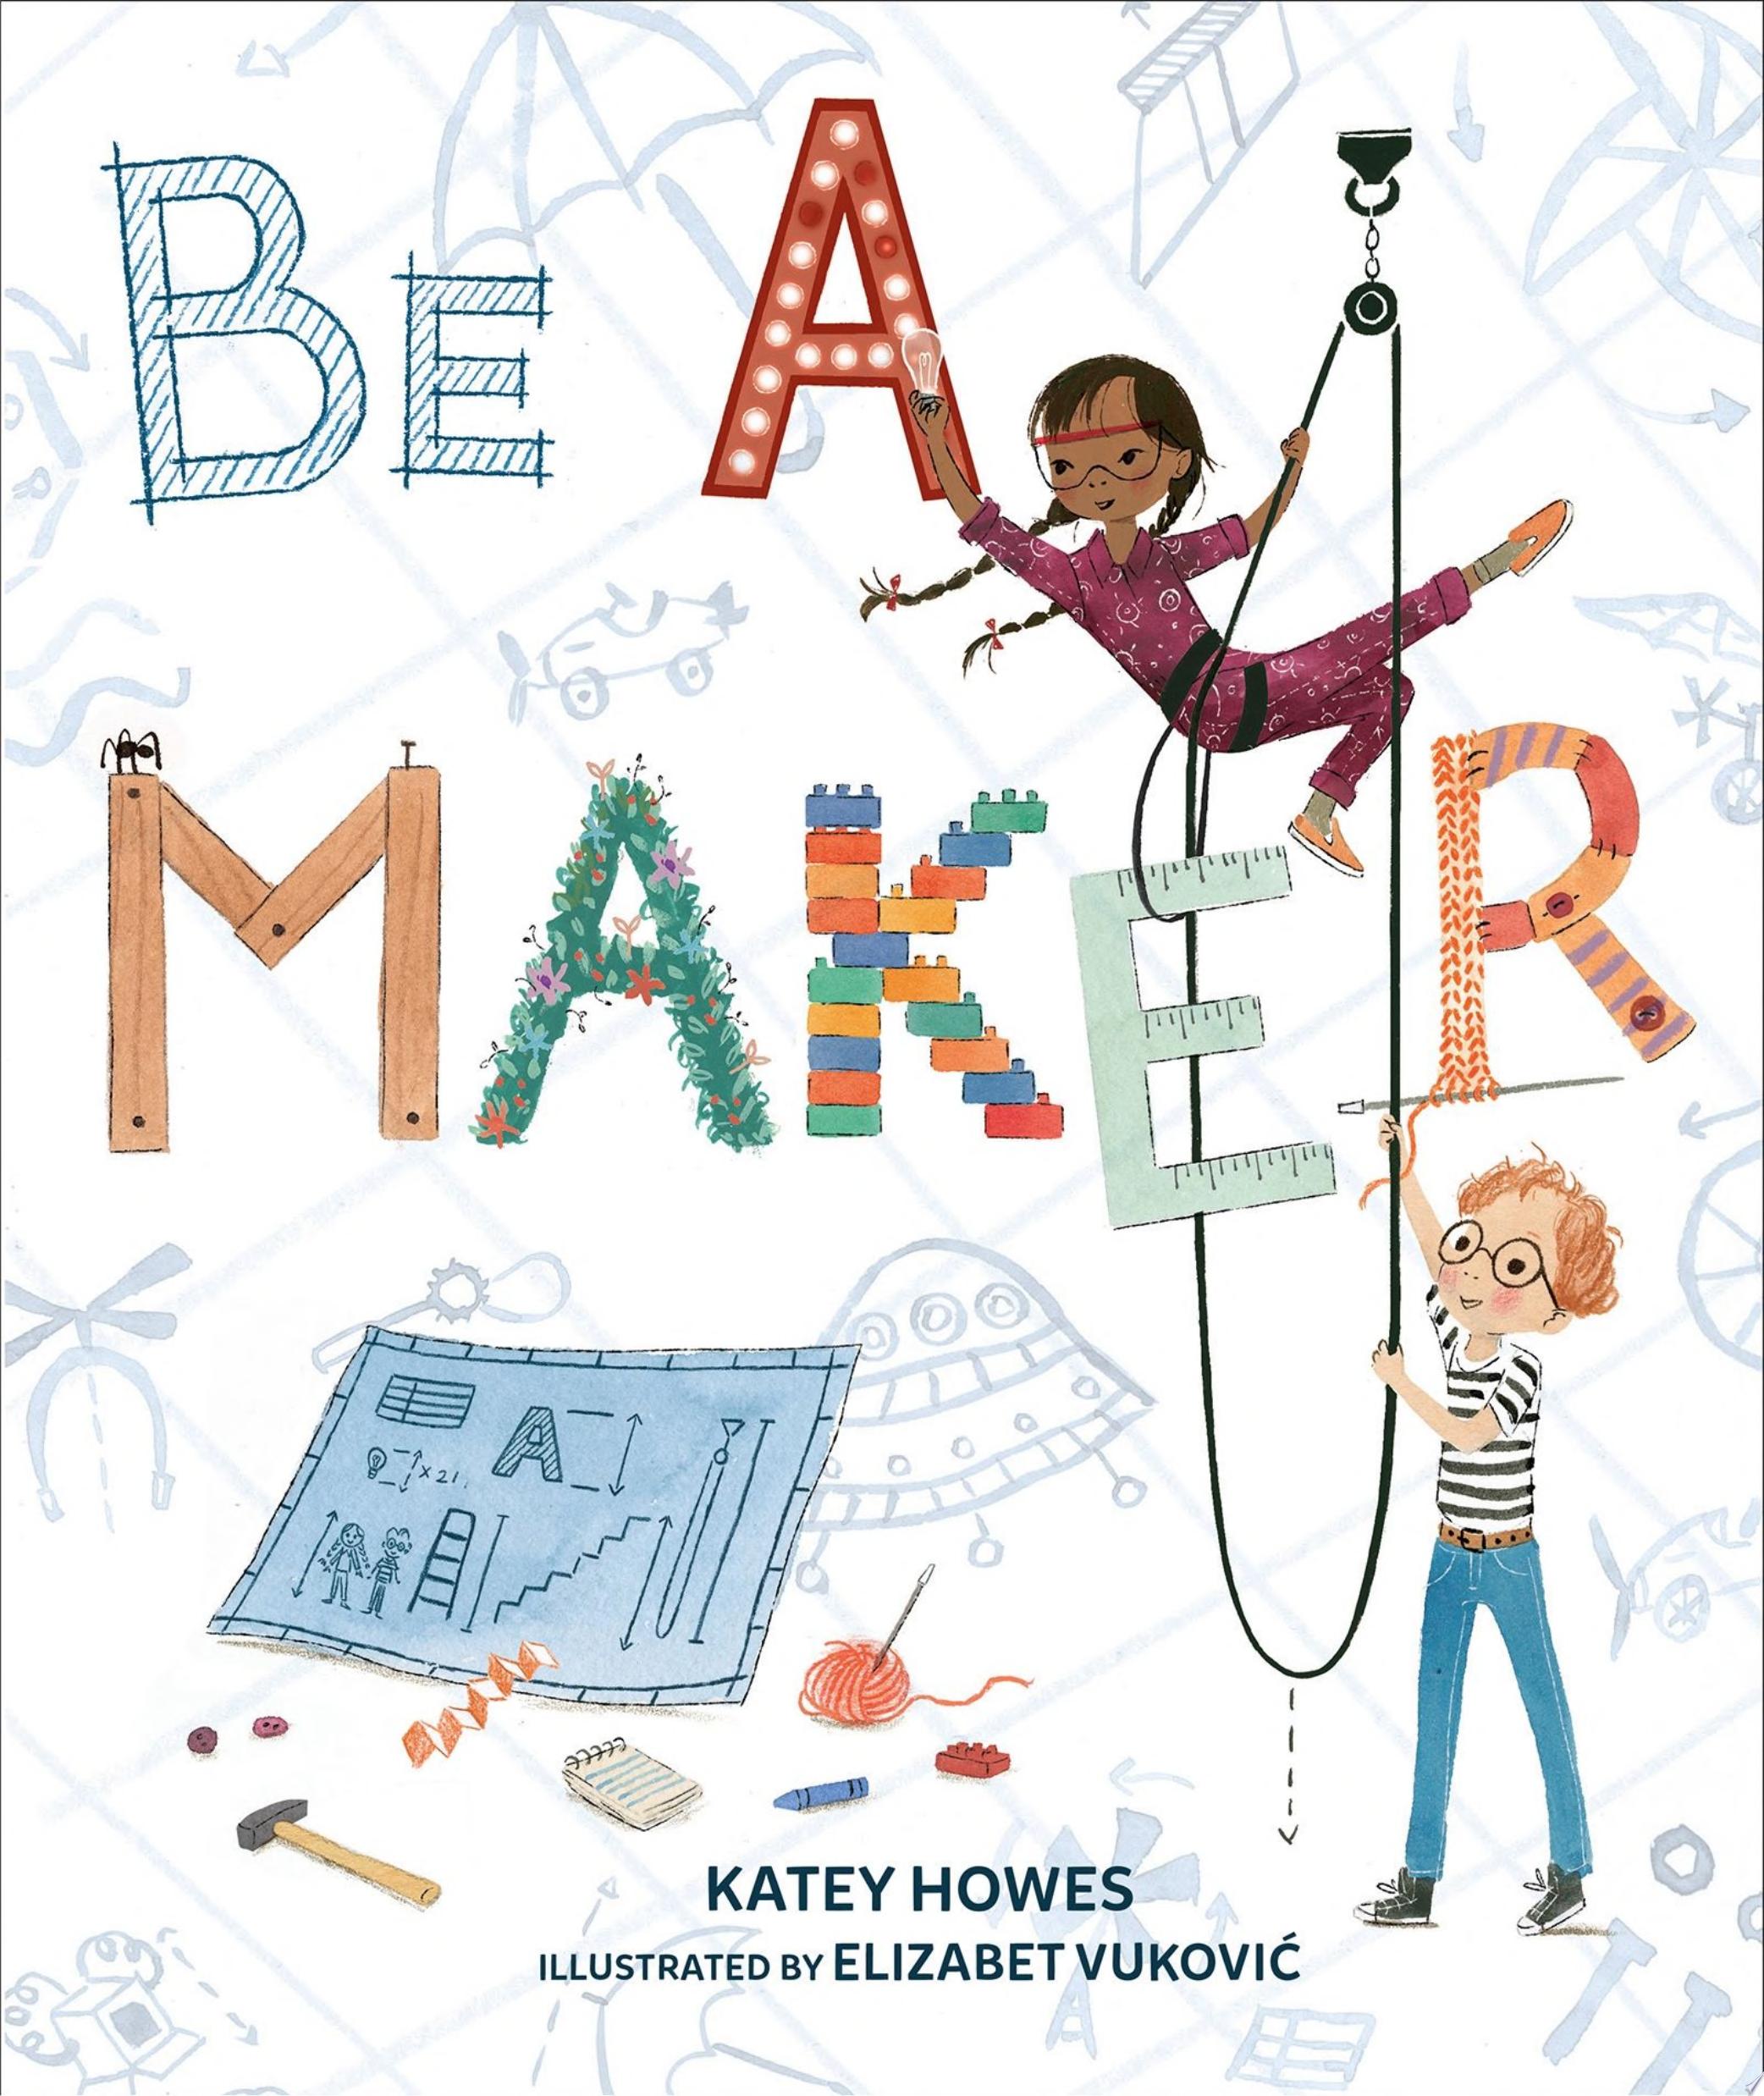 Image for "Be a Maker"